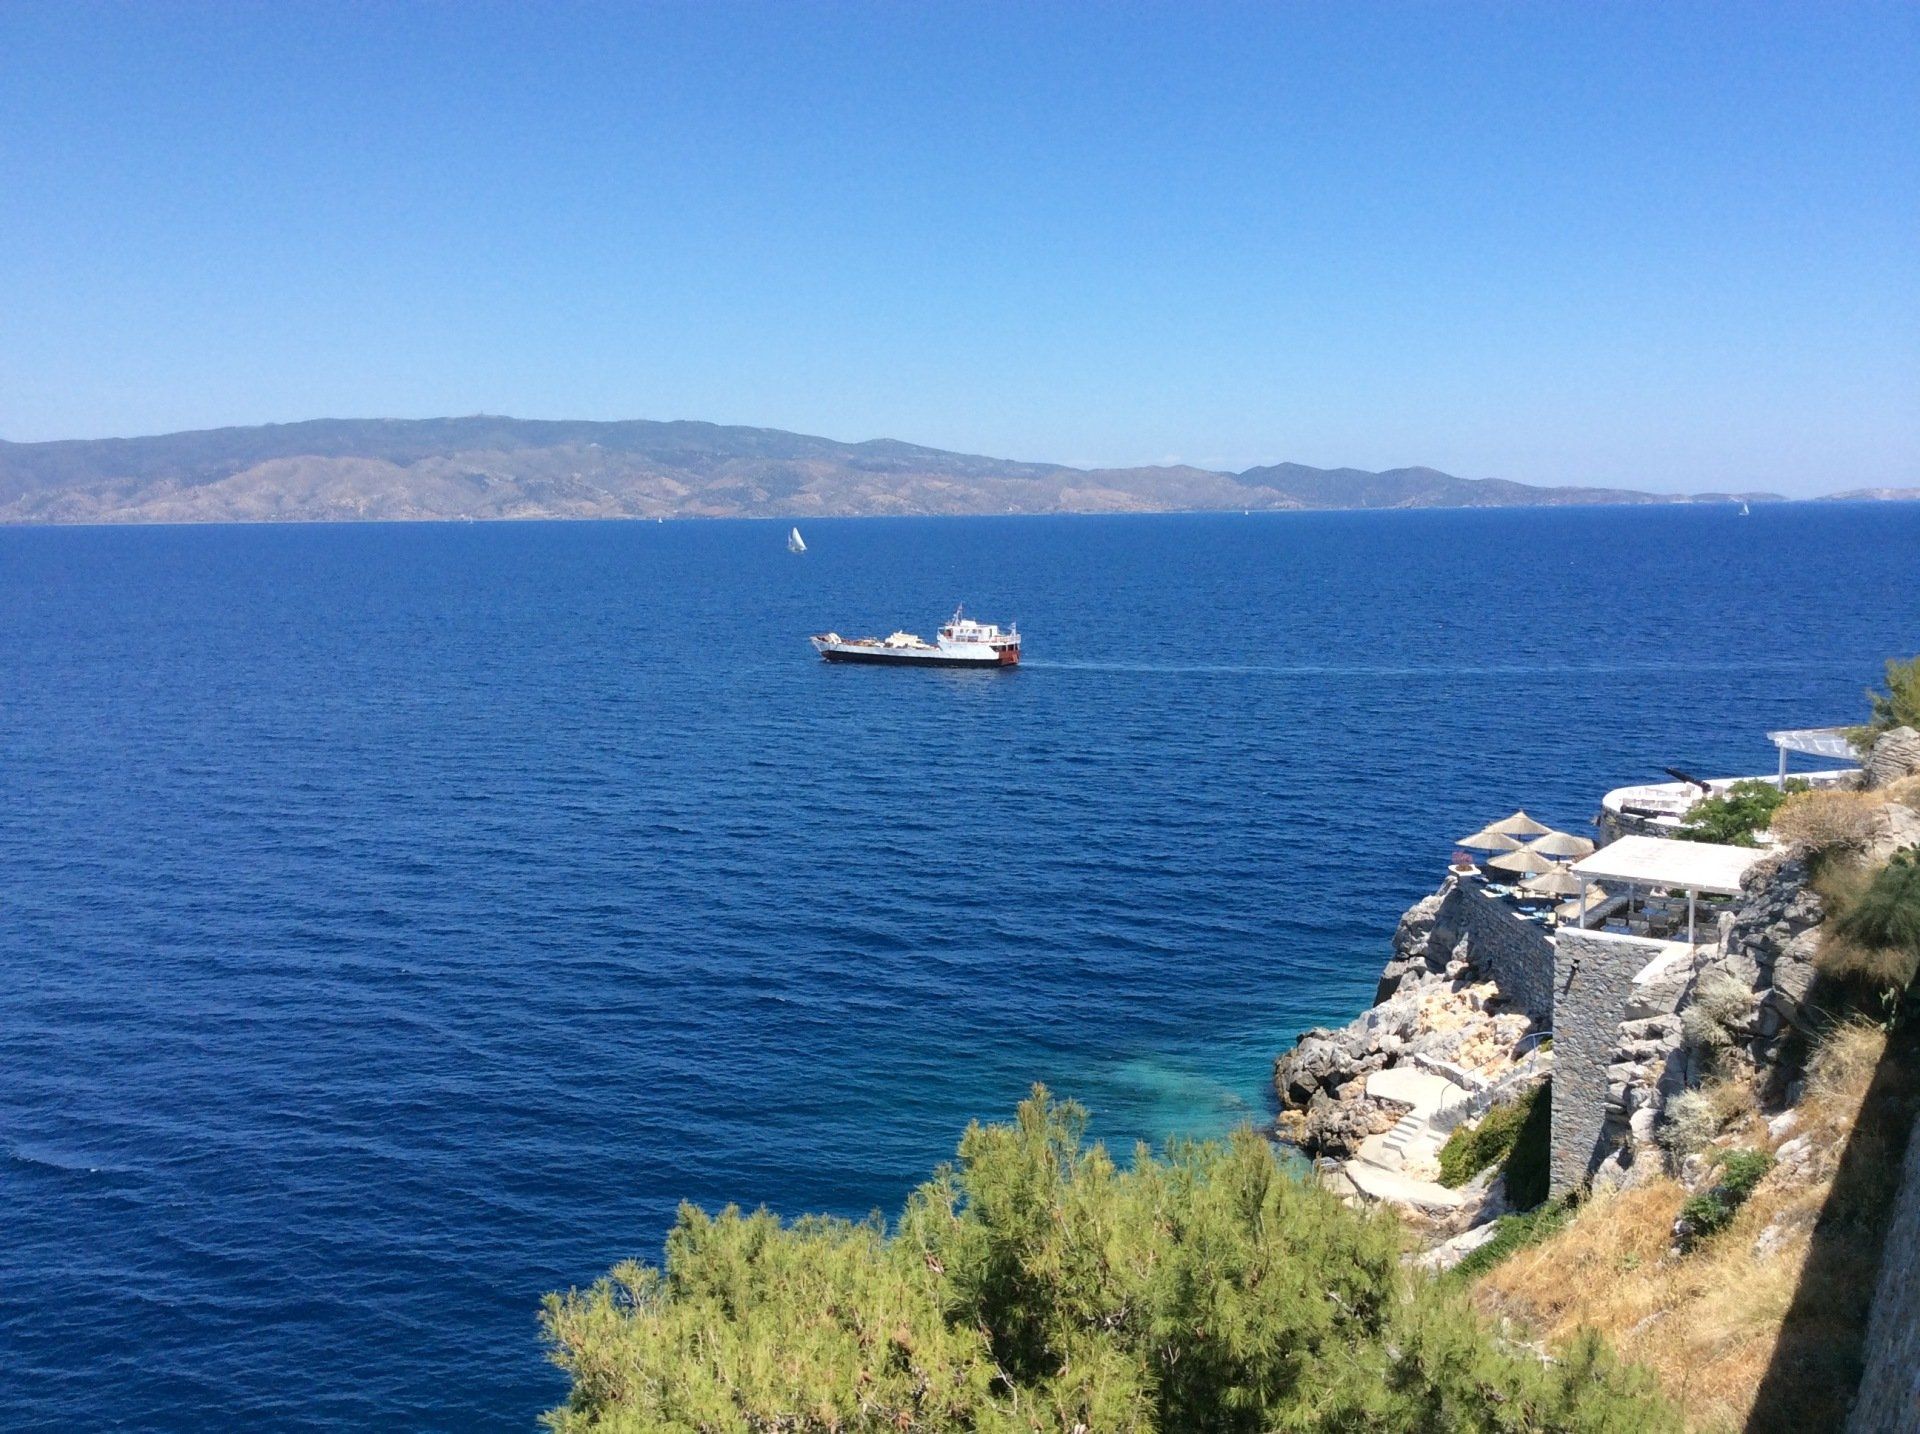 Georgia Supply Boat on Hydra Island in the HydraDirect Shopping & Services pages